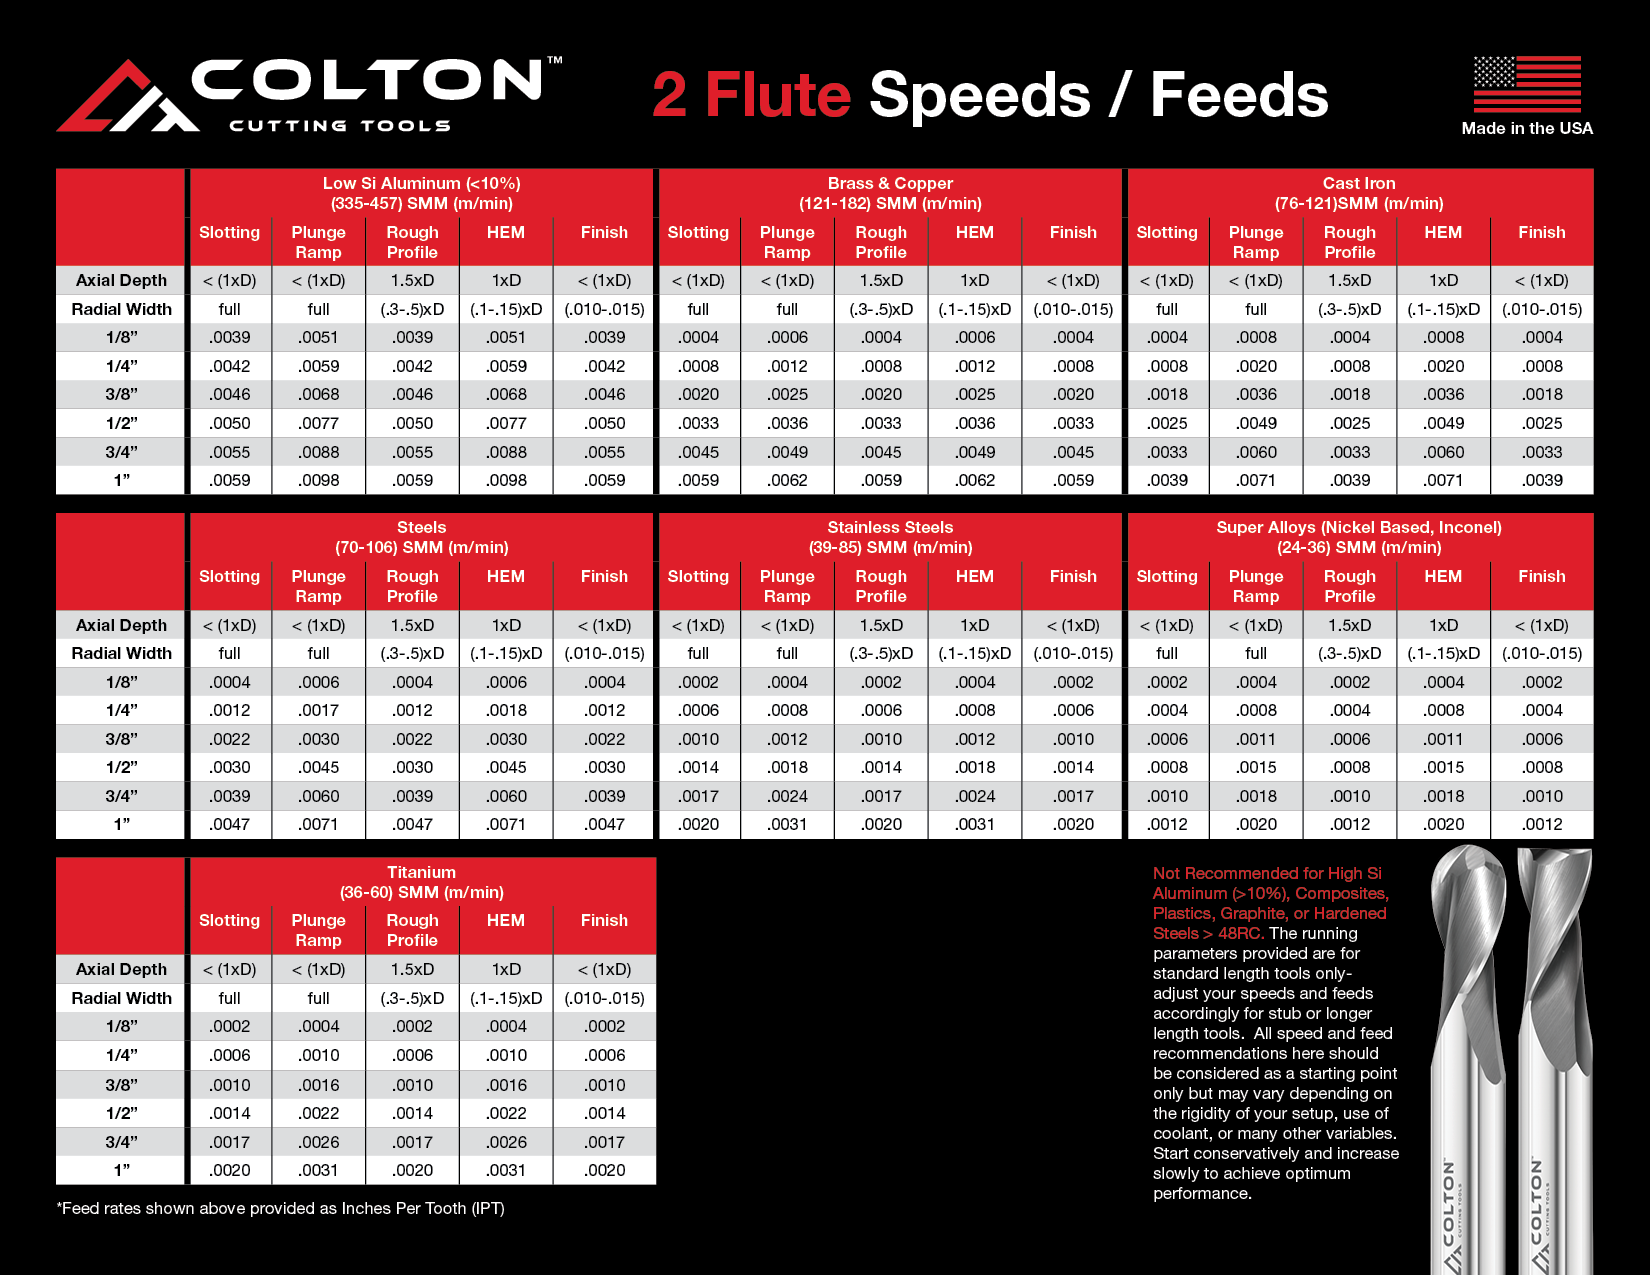 Colton 2 flute end mill speed and feed chart